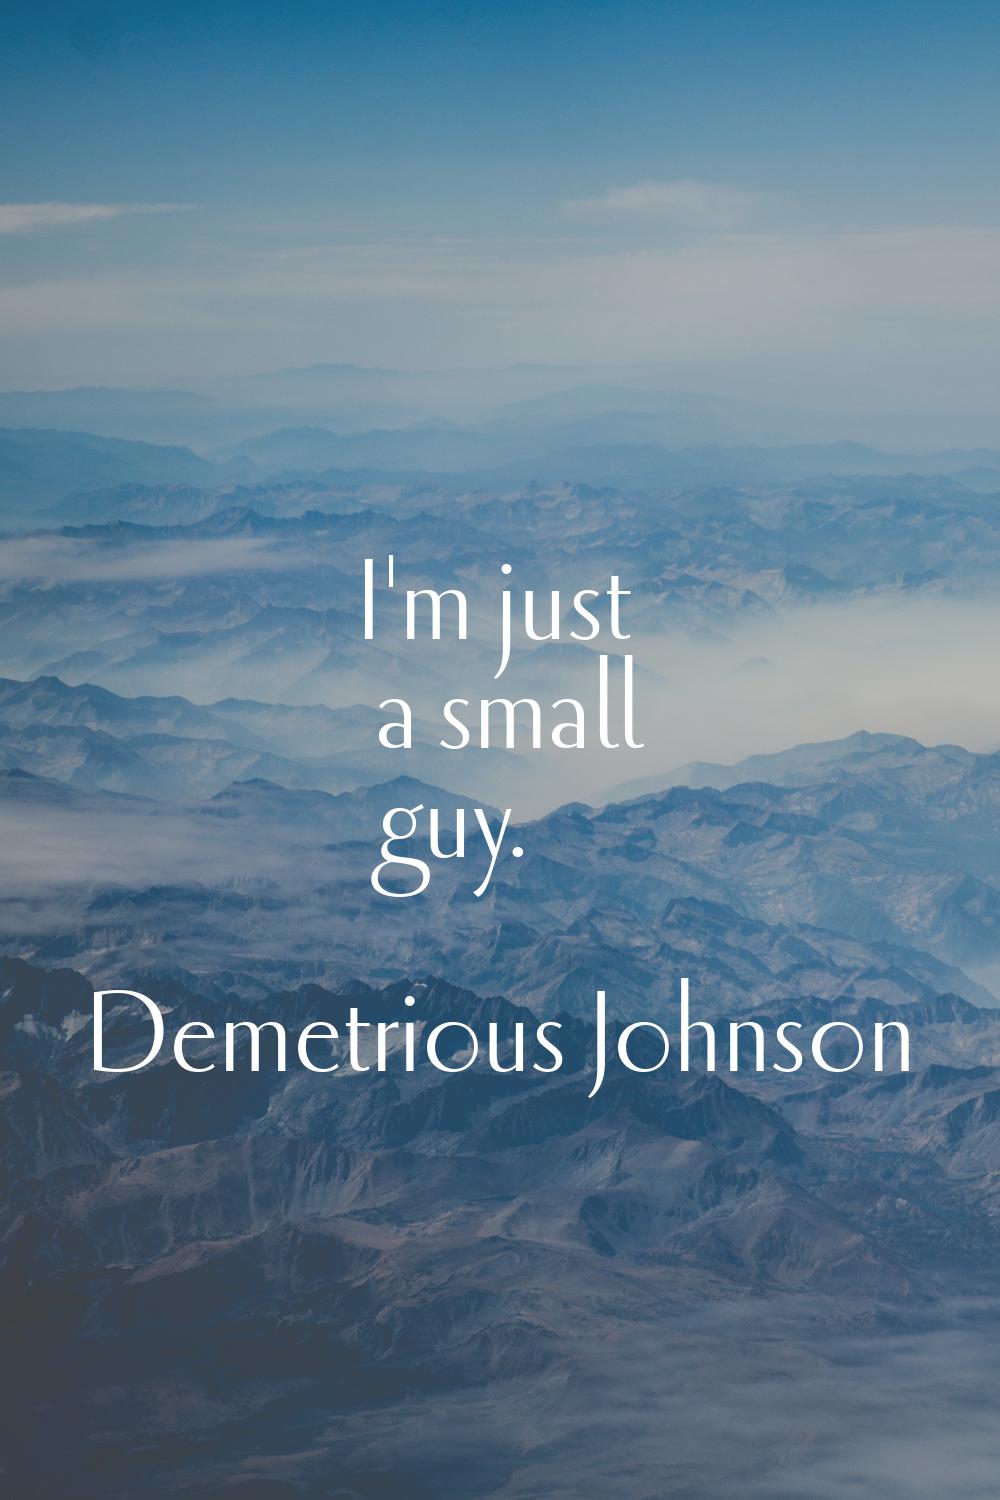 I'm just a small guy.